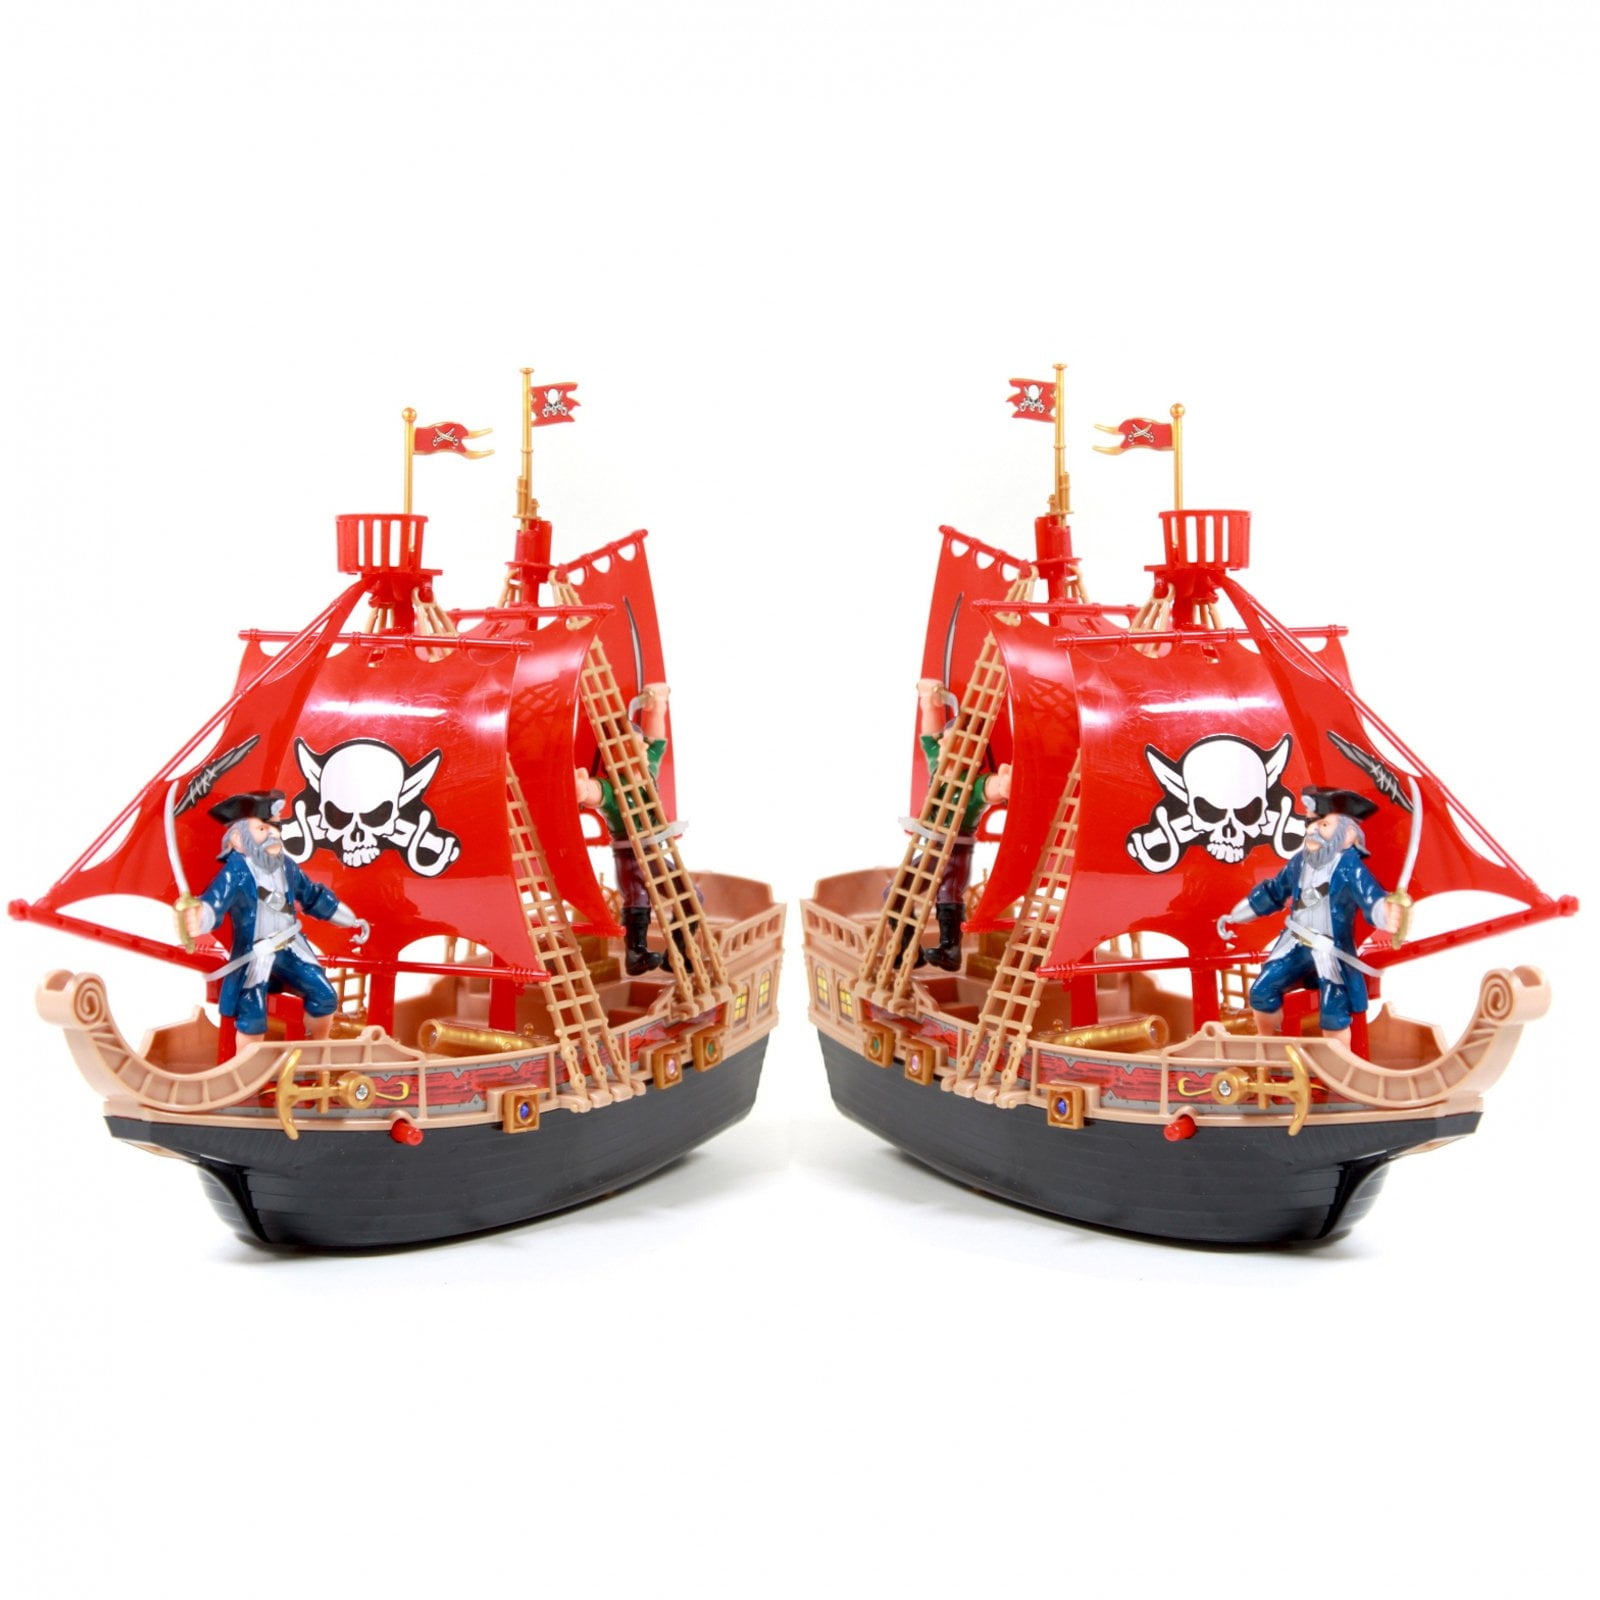 Kids Toy Pirate Ship 12 Plastic Pirate Action Figures For Boys Play Gift NEW 